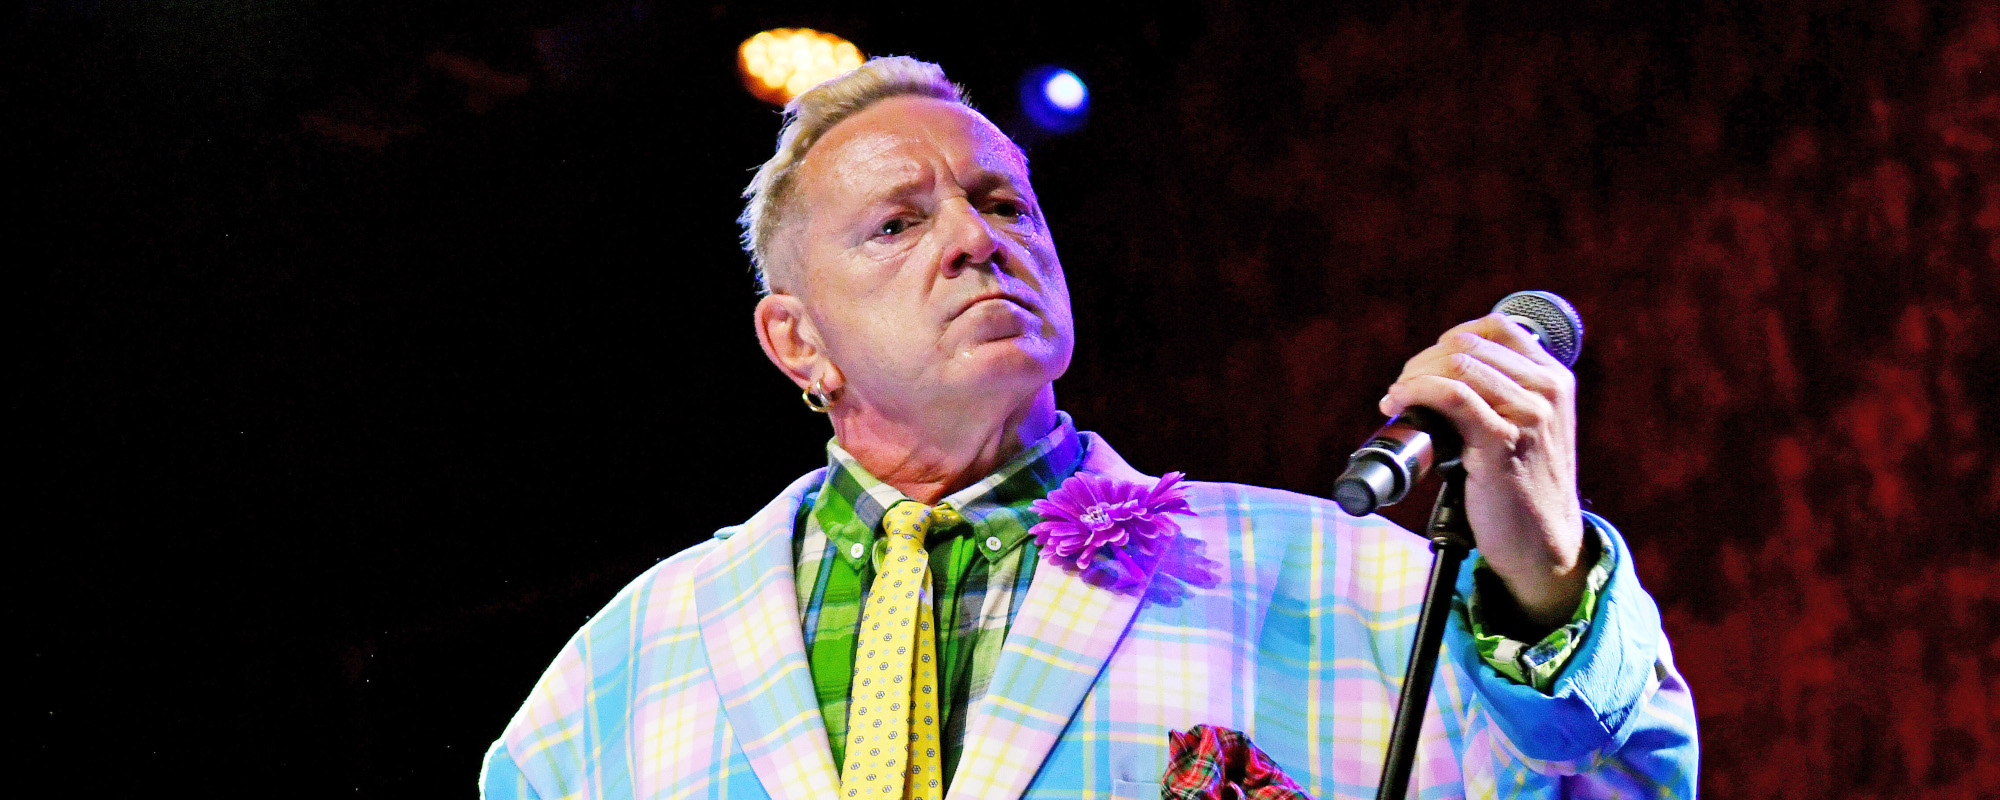 John Lydon Refers to England as a “Mess”